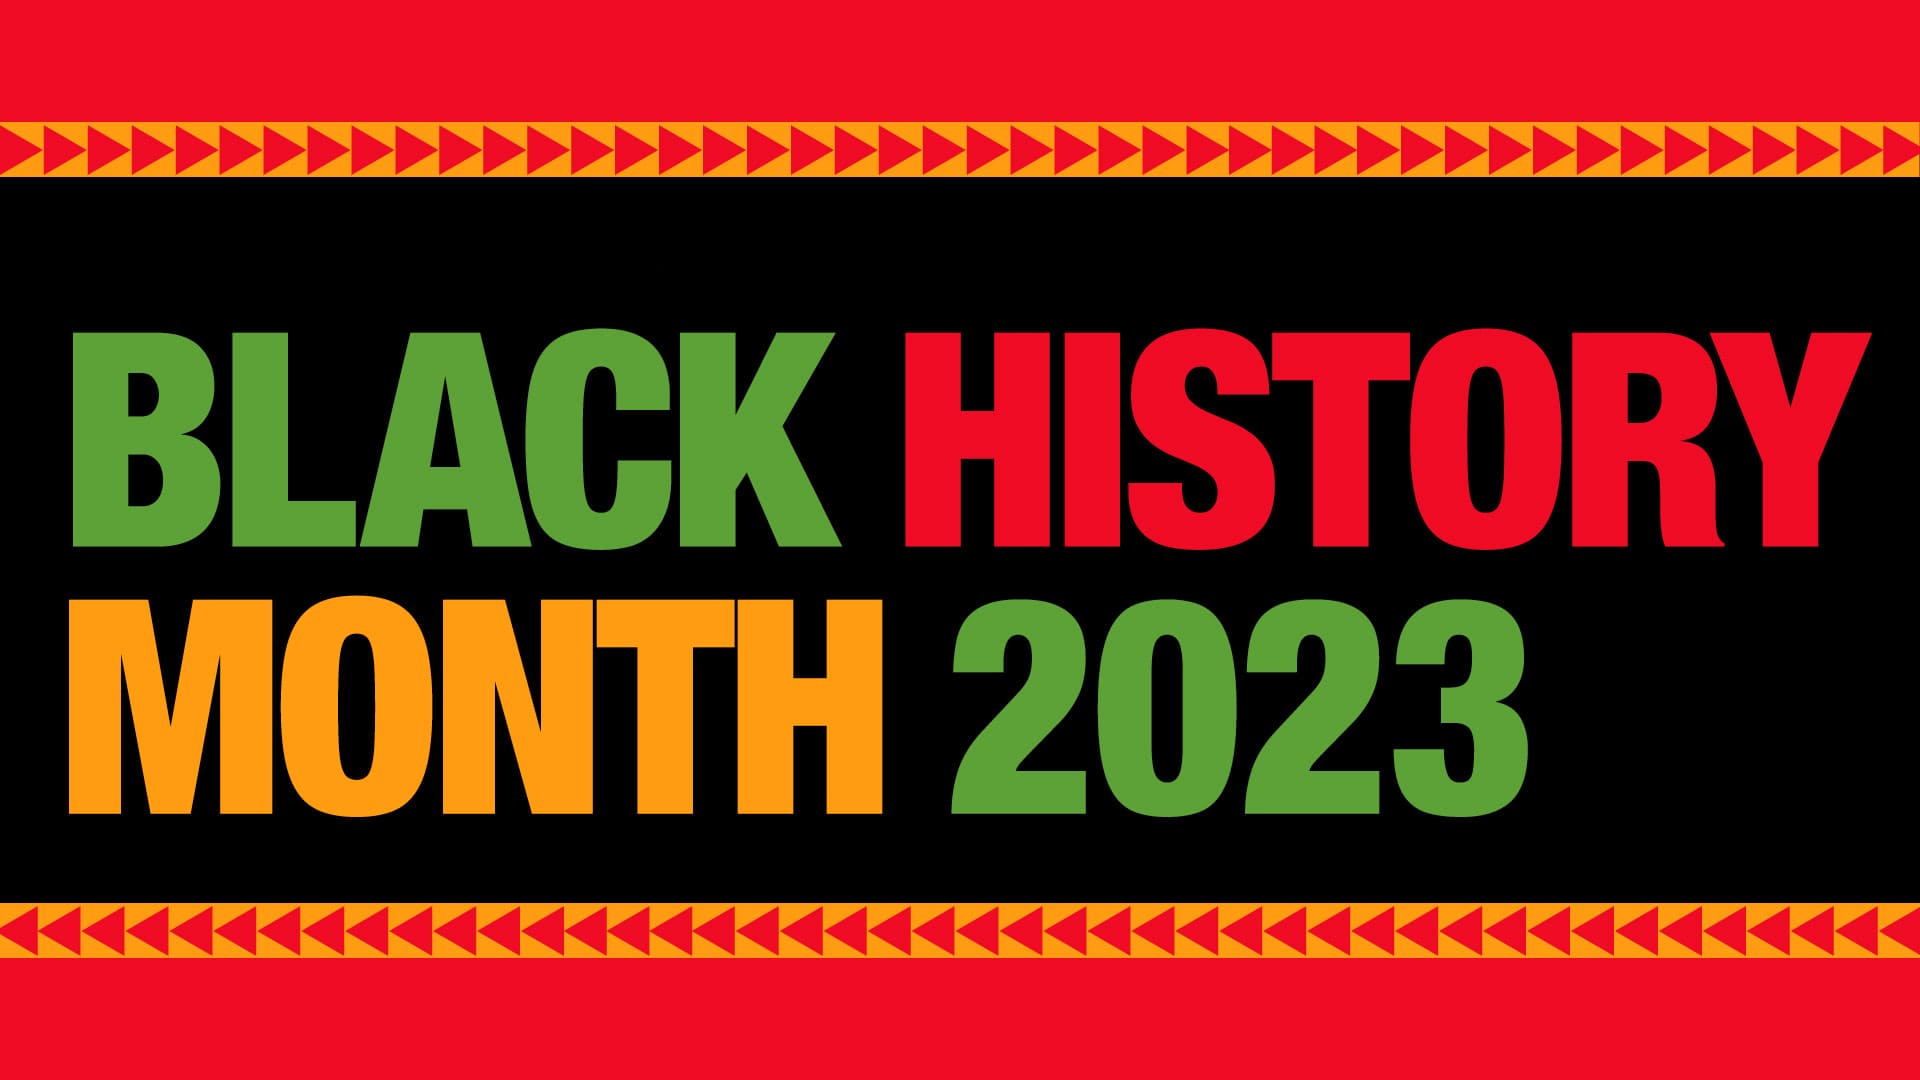 Black History Month 2023 Wallpapers